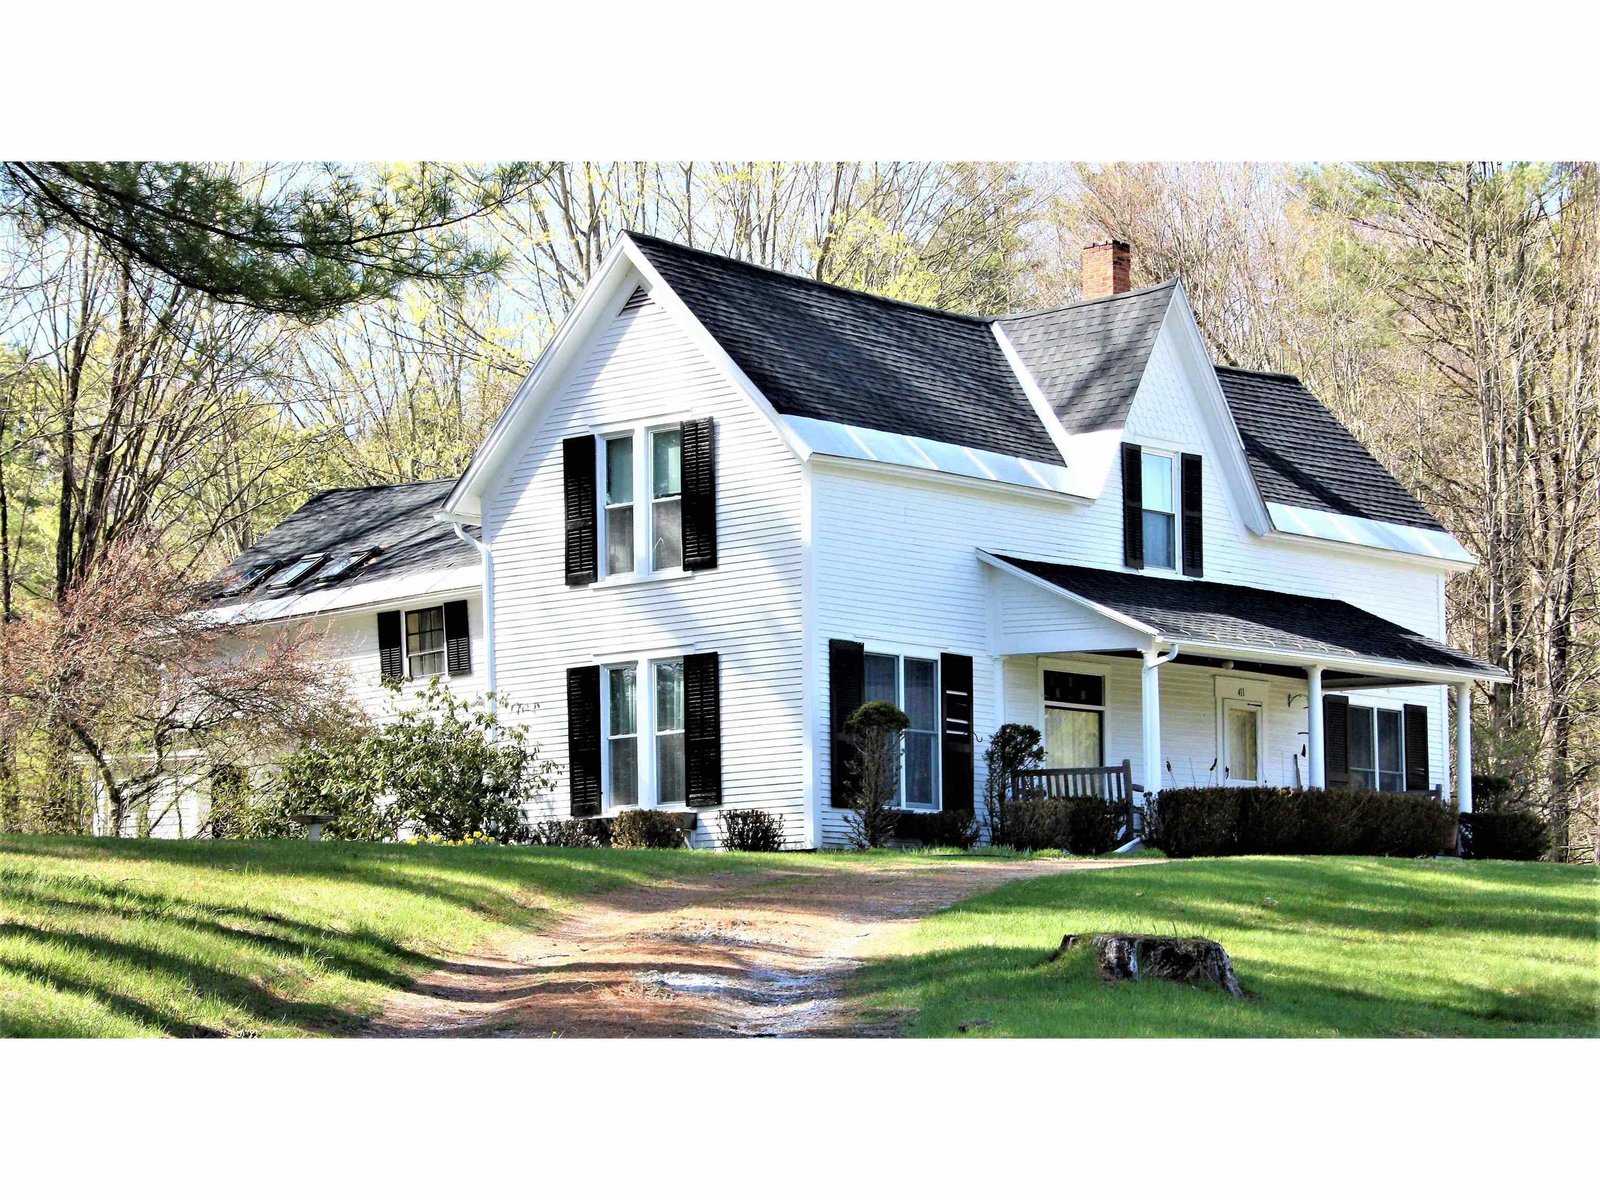 Sold property in Pittsford